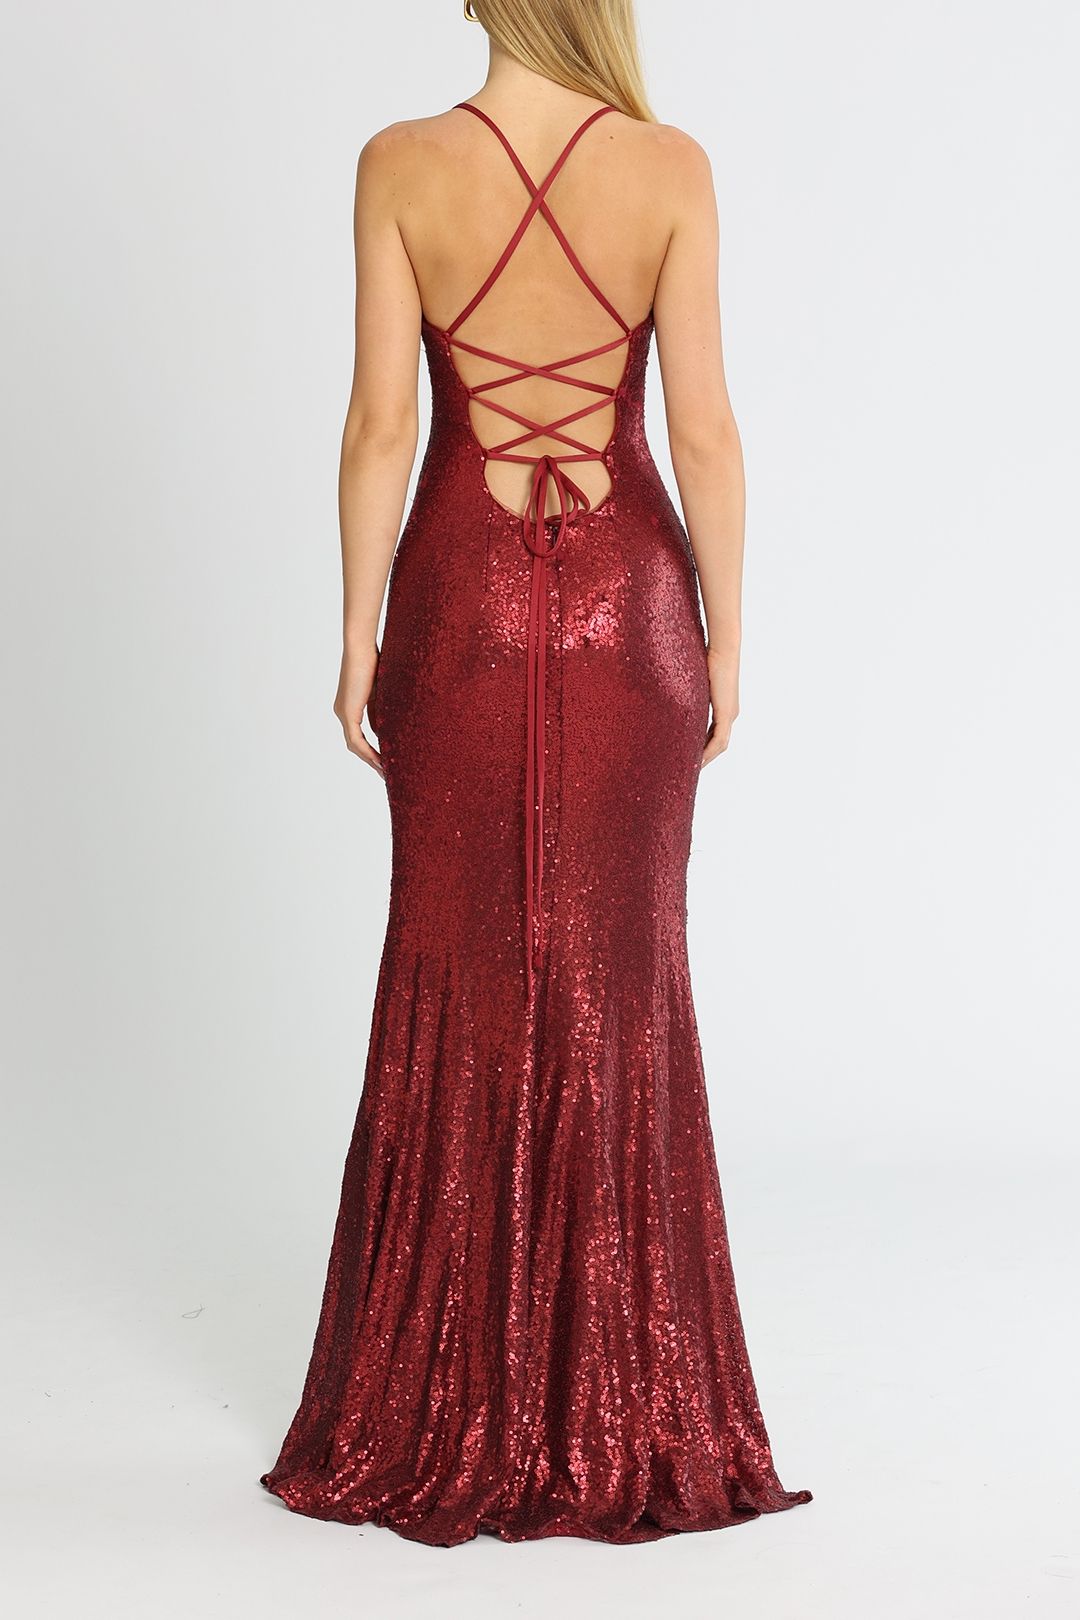 Tania Olsen India Gown Red Backless